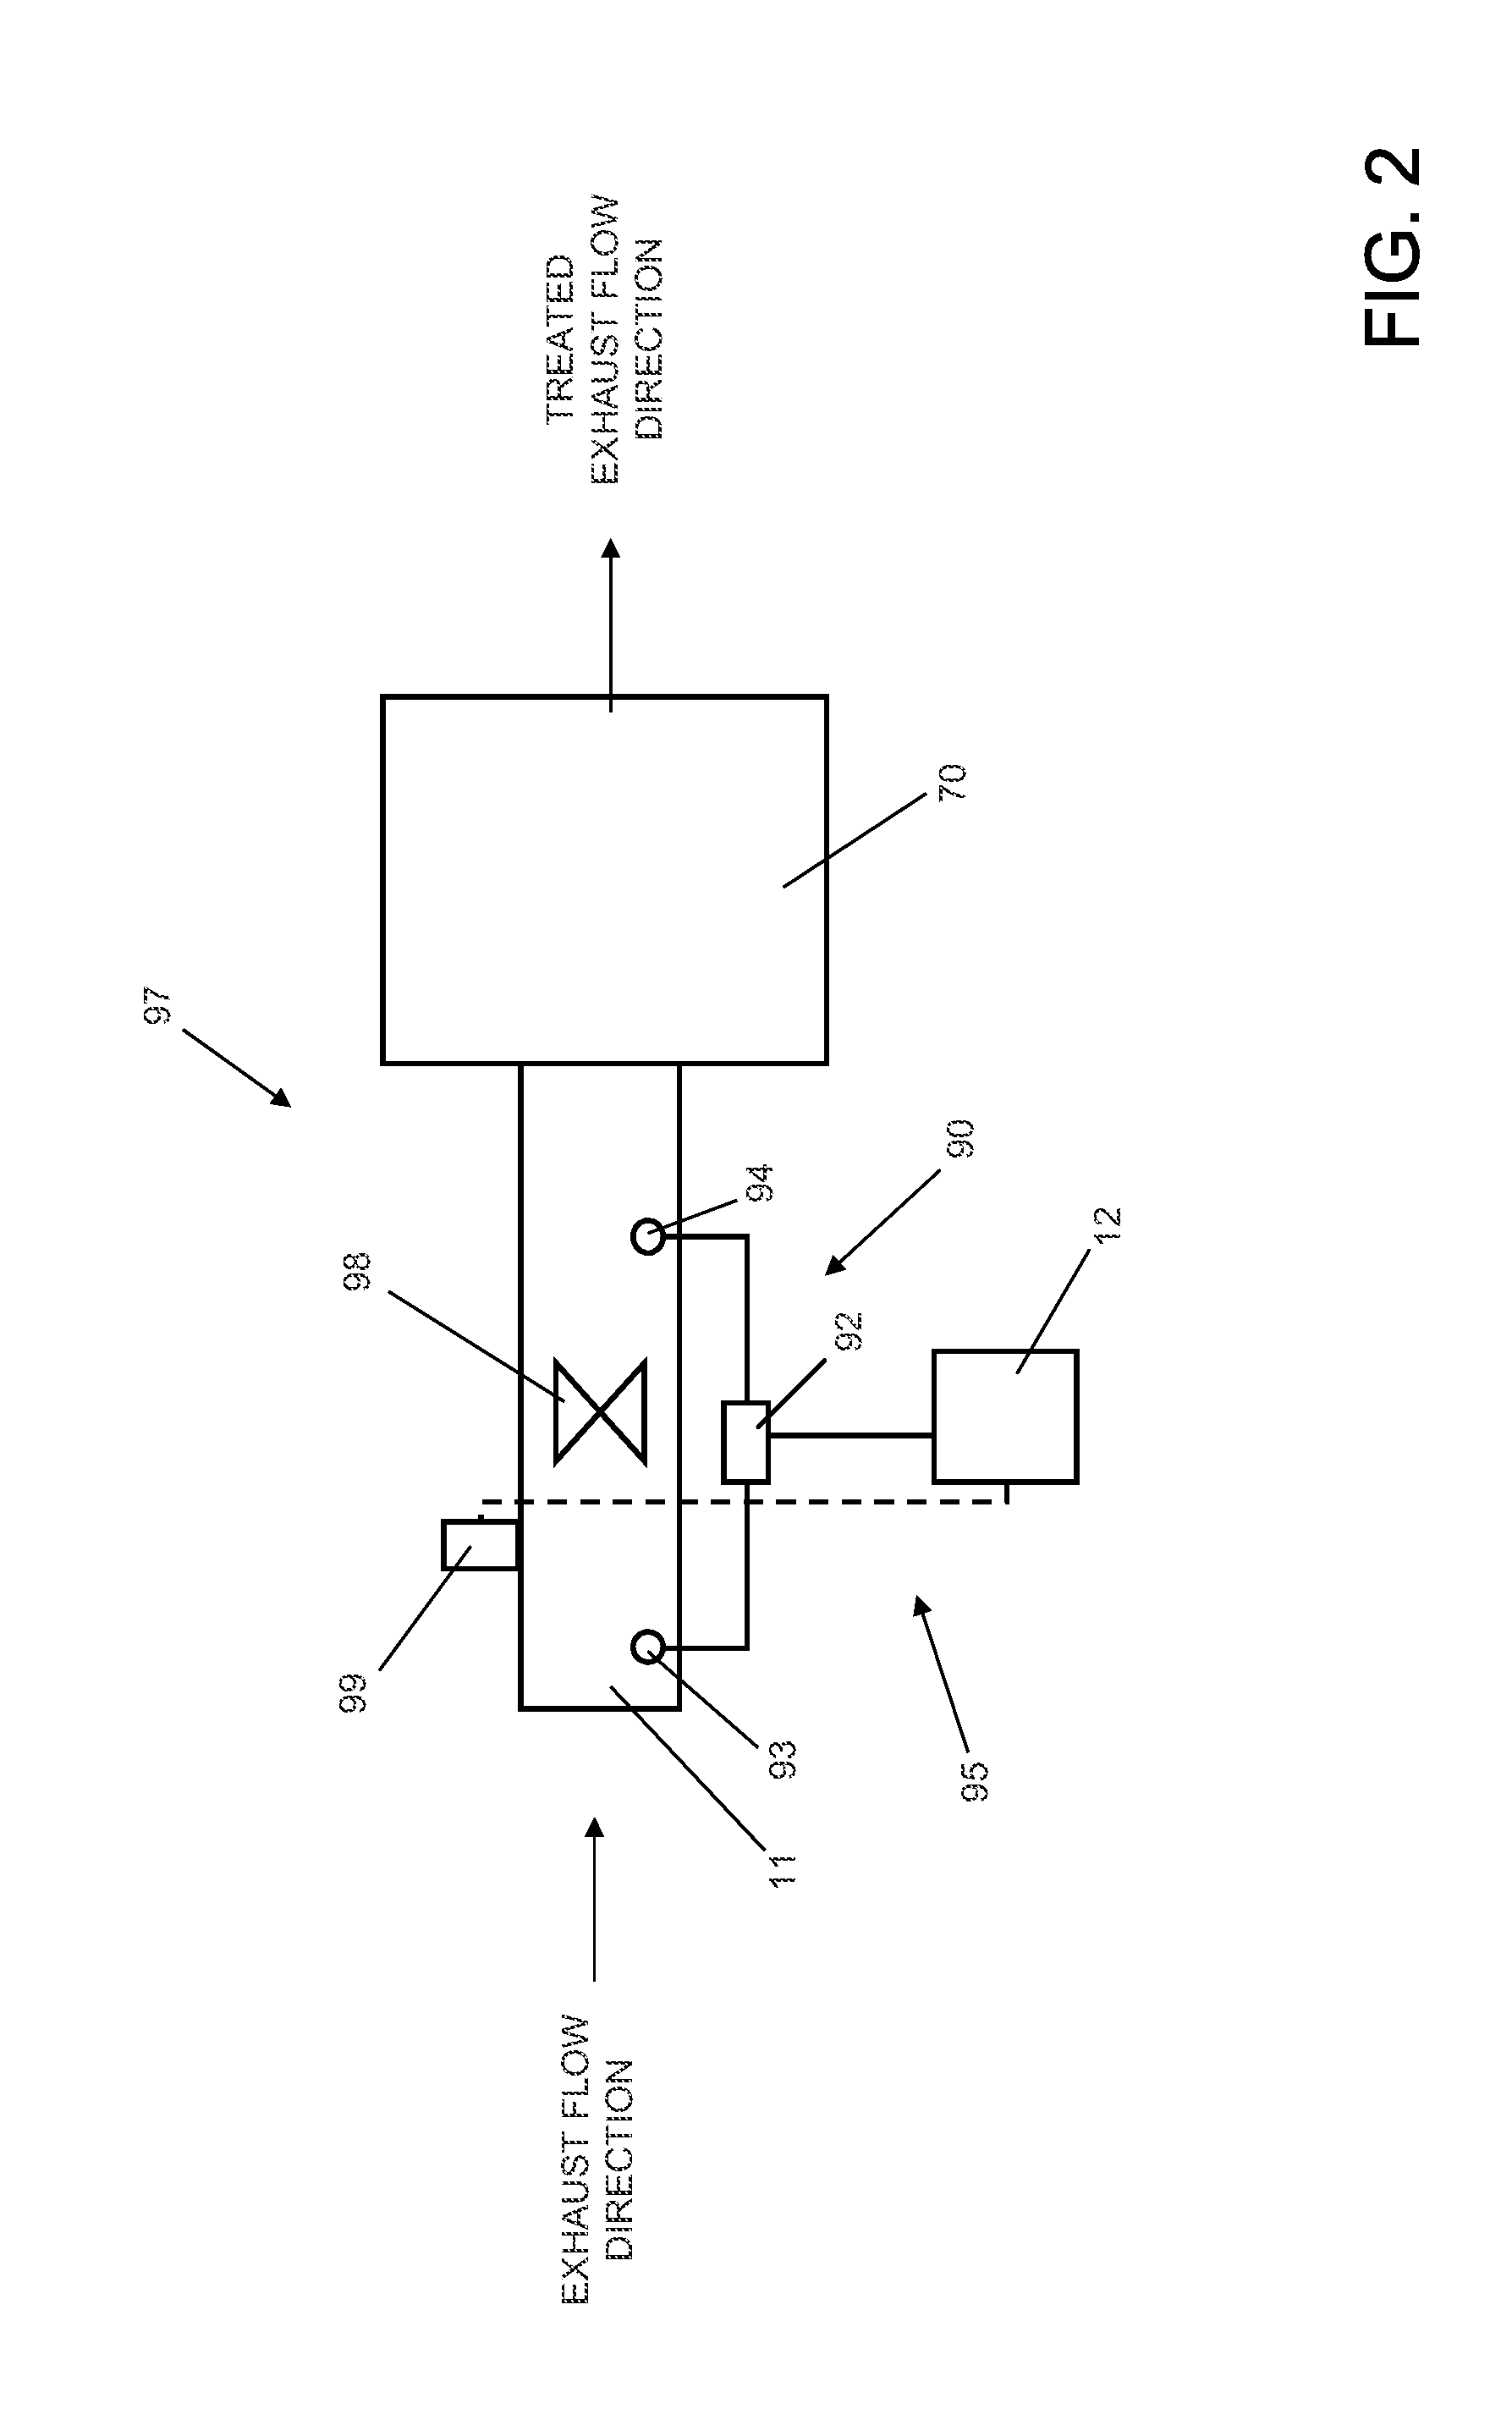 Method for measuring the quality of ammonia injection for an exhaust gas after treatment system of a vehicle